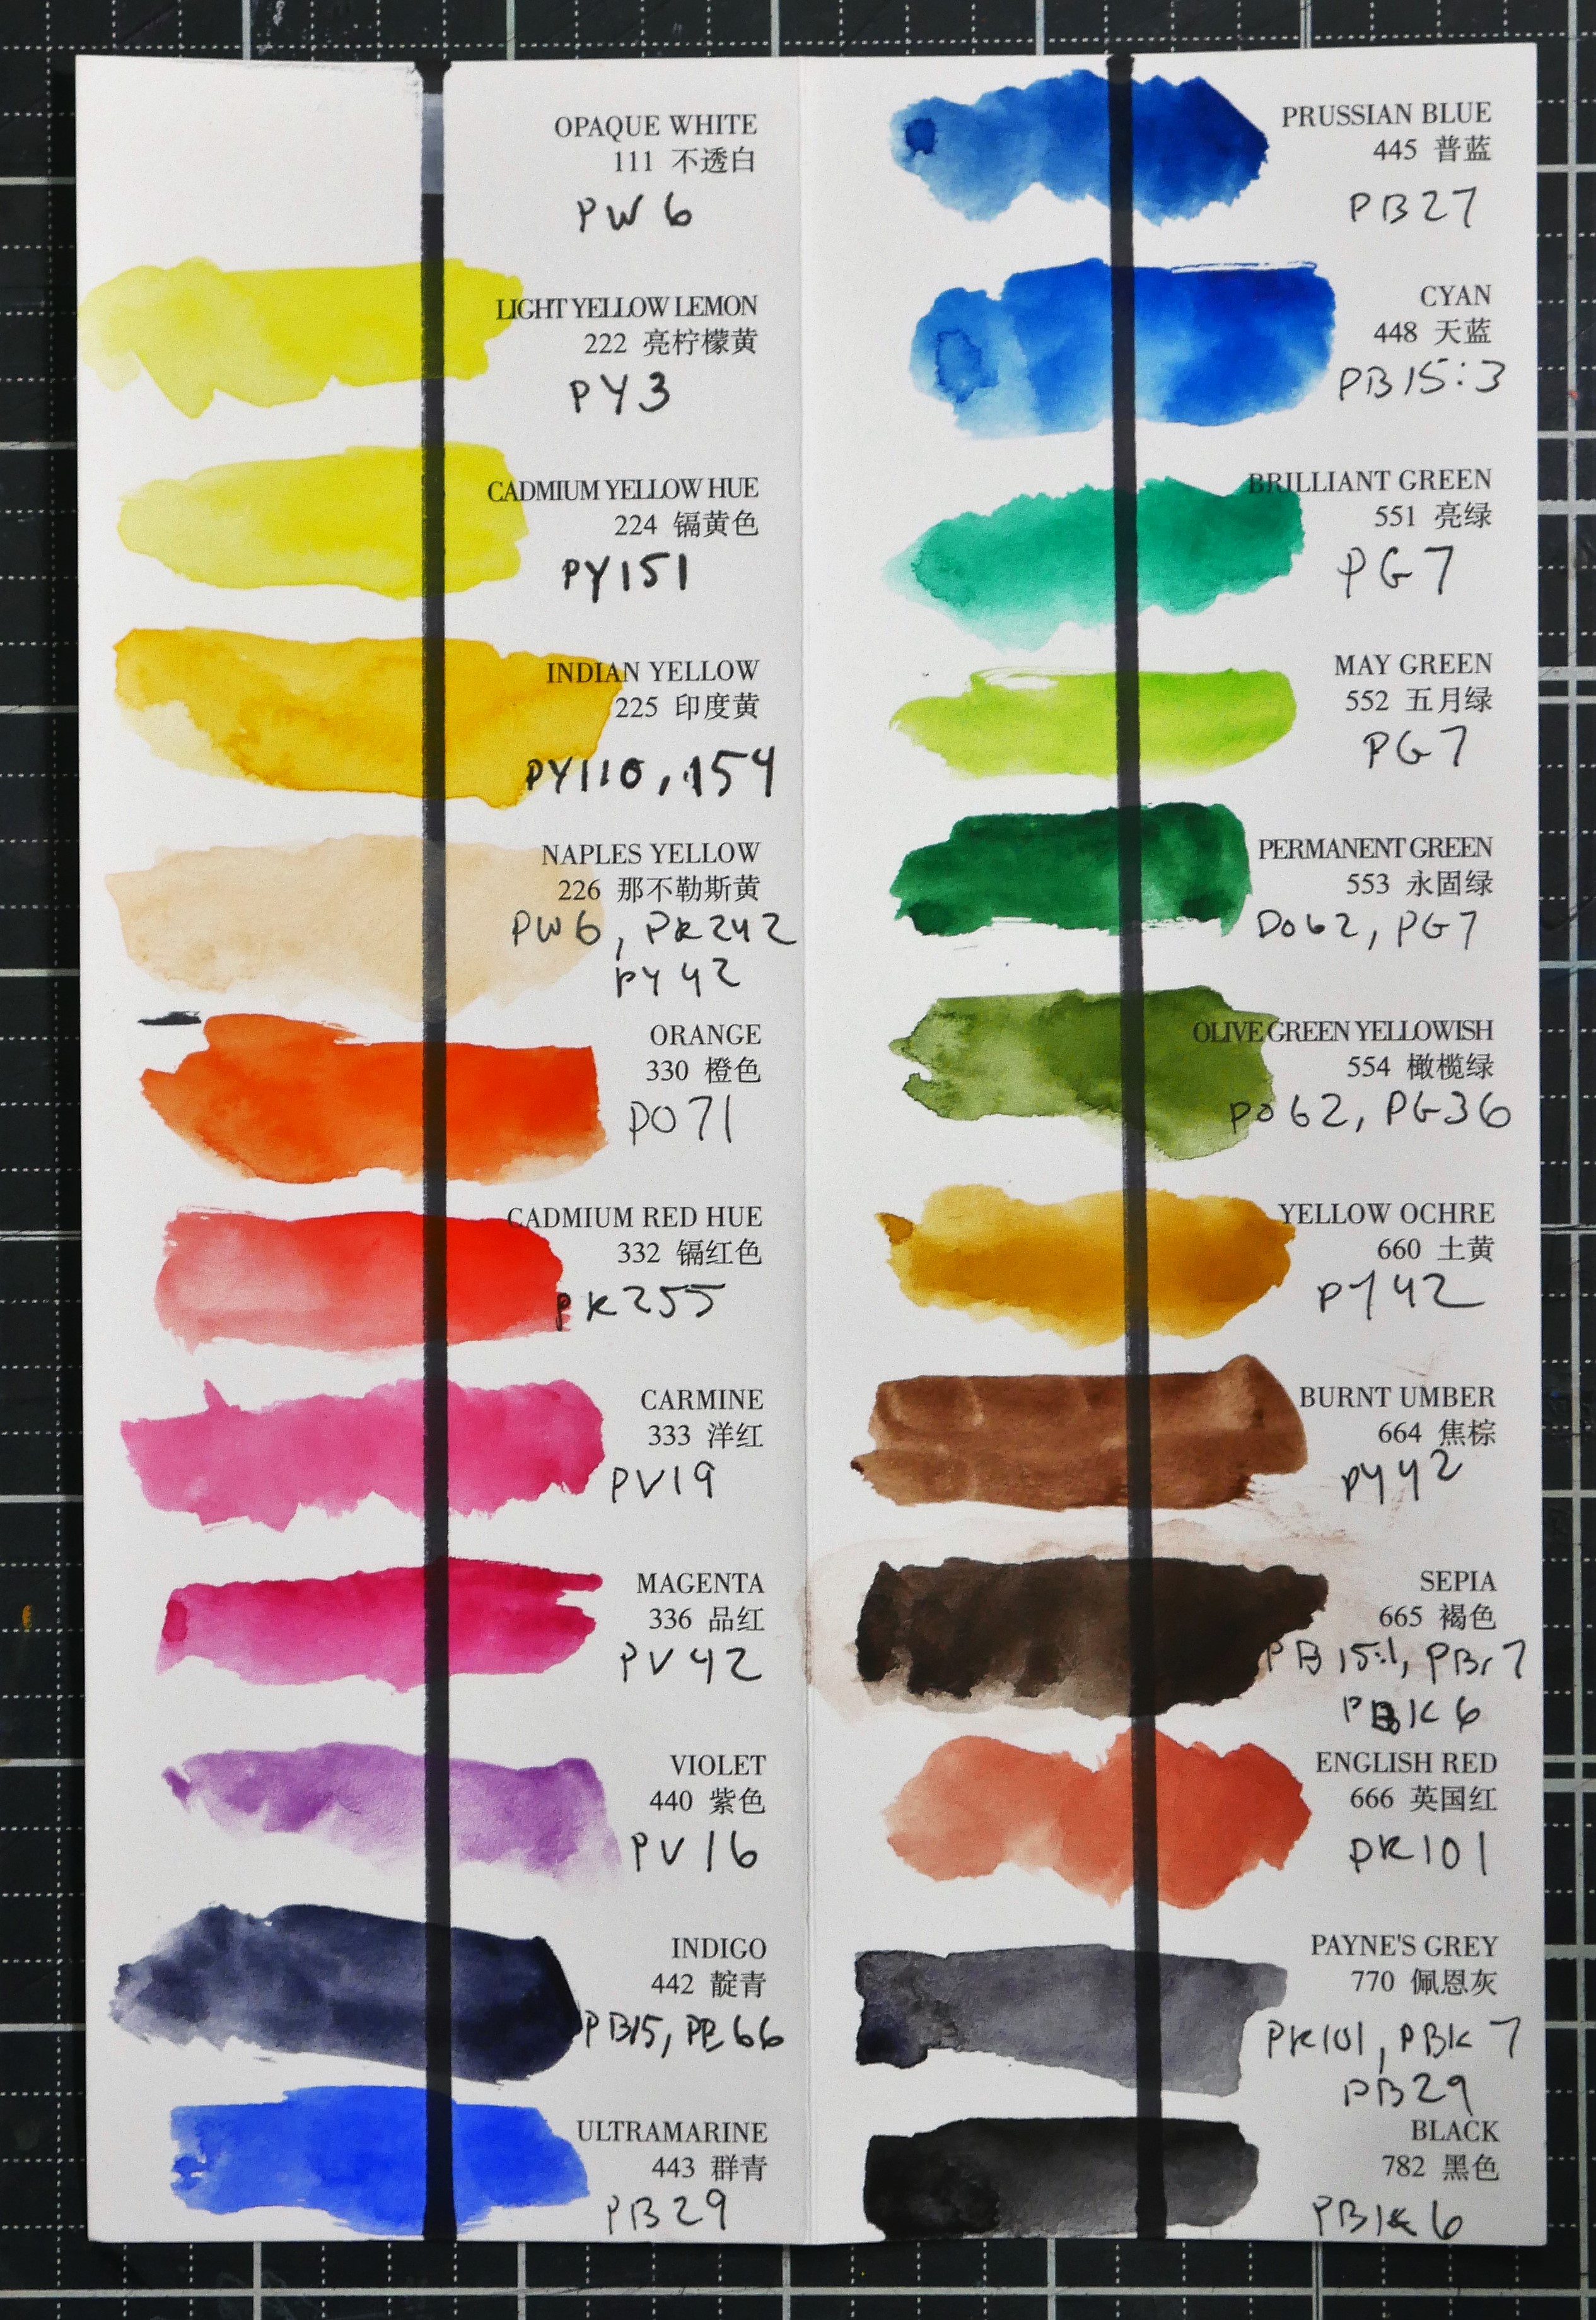 REview and soft Roses (Paul Rubens New Gemstone Watercolor set